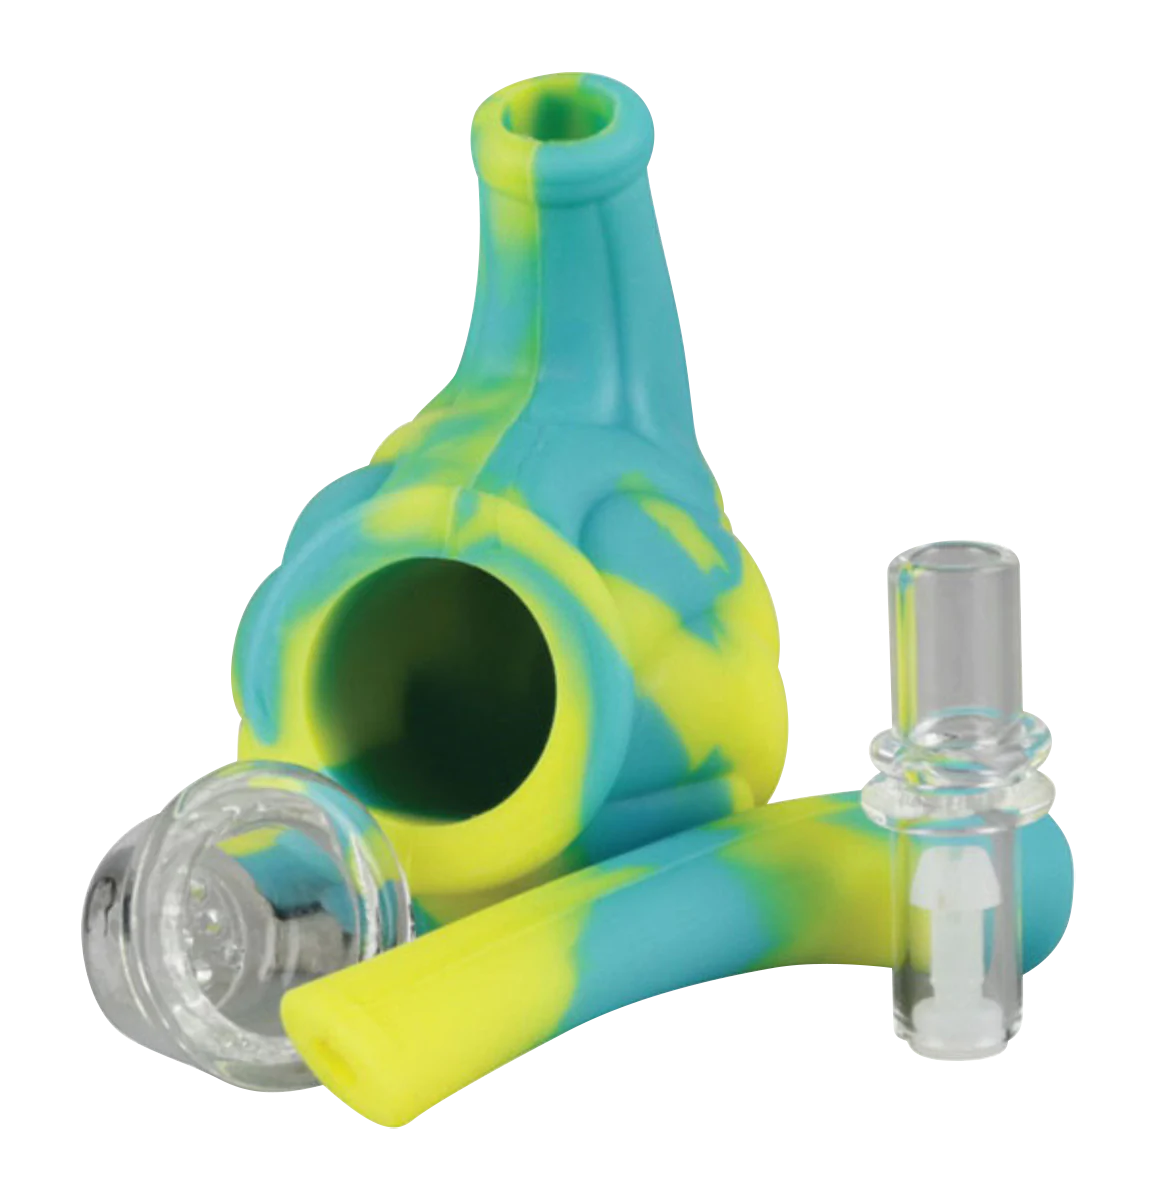 Compact silicone hand pipe with removable glass bowl, blue and yellow design, 5.5" size, side view